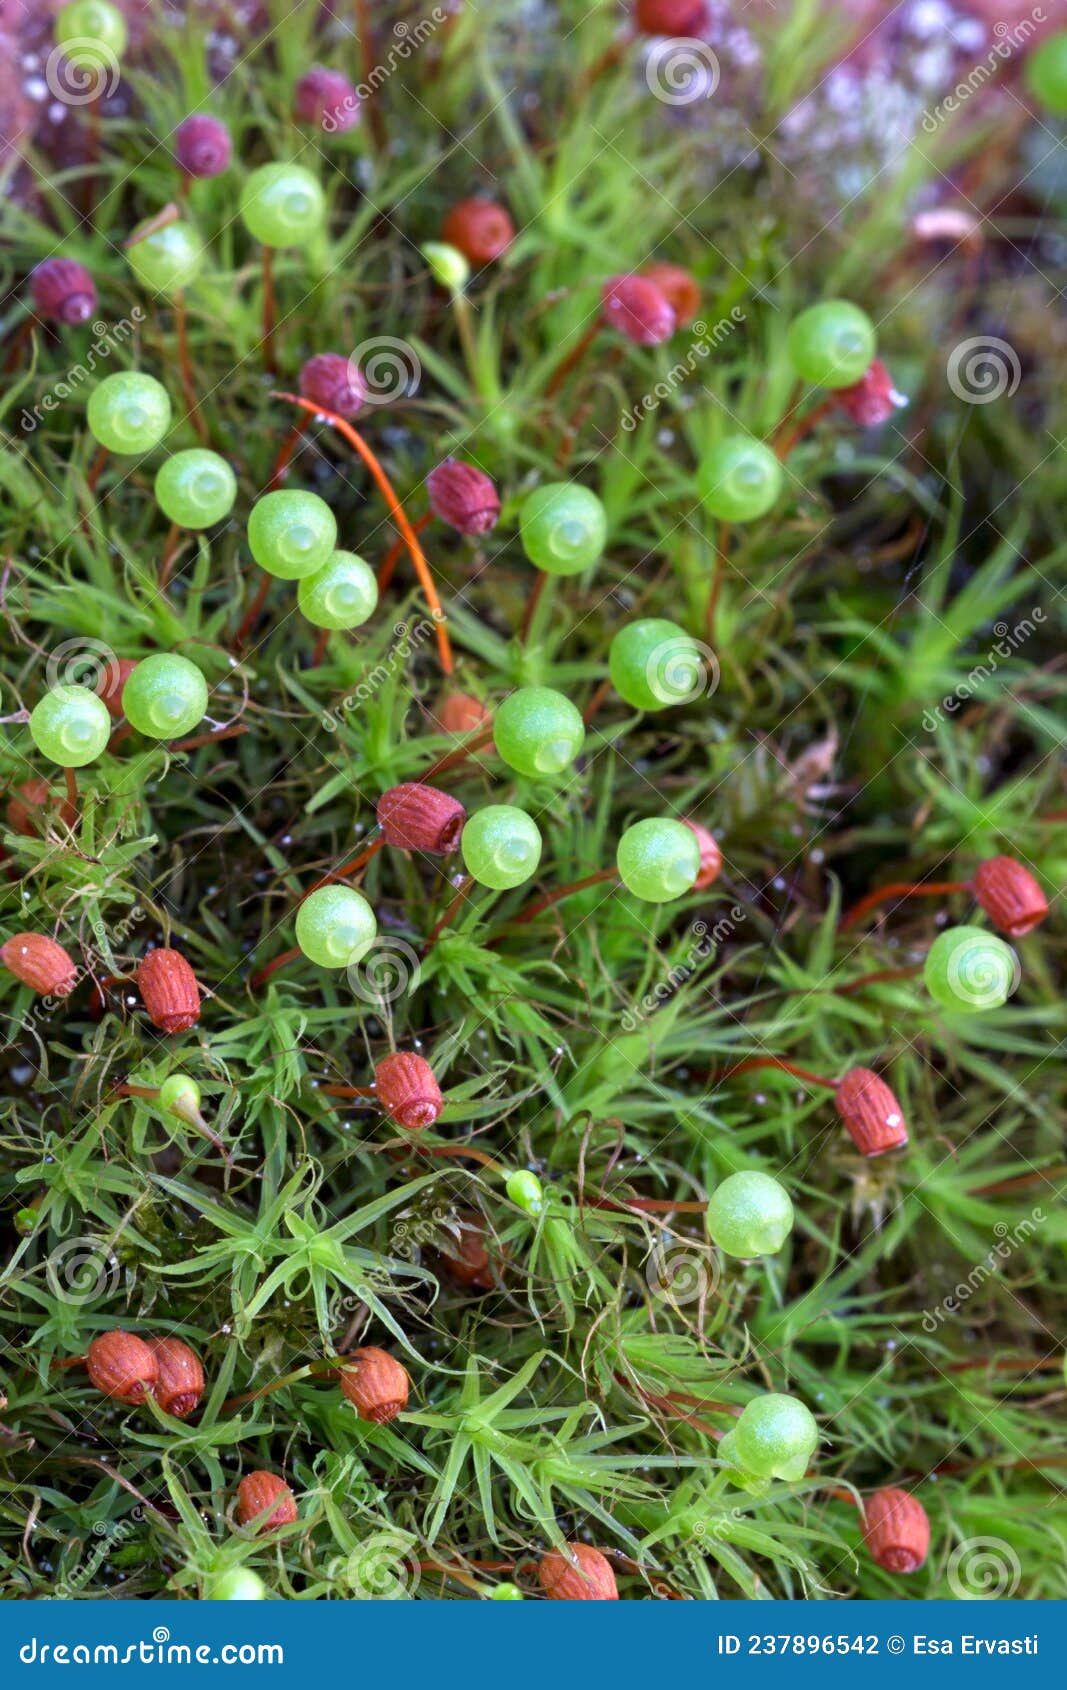 https://www.dreamstime.com/bartramia-pomiformis-spherical-asymmetrical-capsules-mm-long-green-become-brownish-ridged-furrowed-age-grows-image237896542